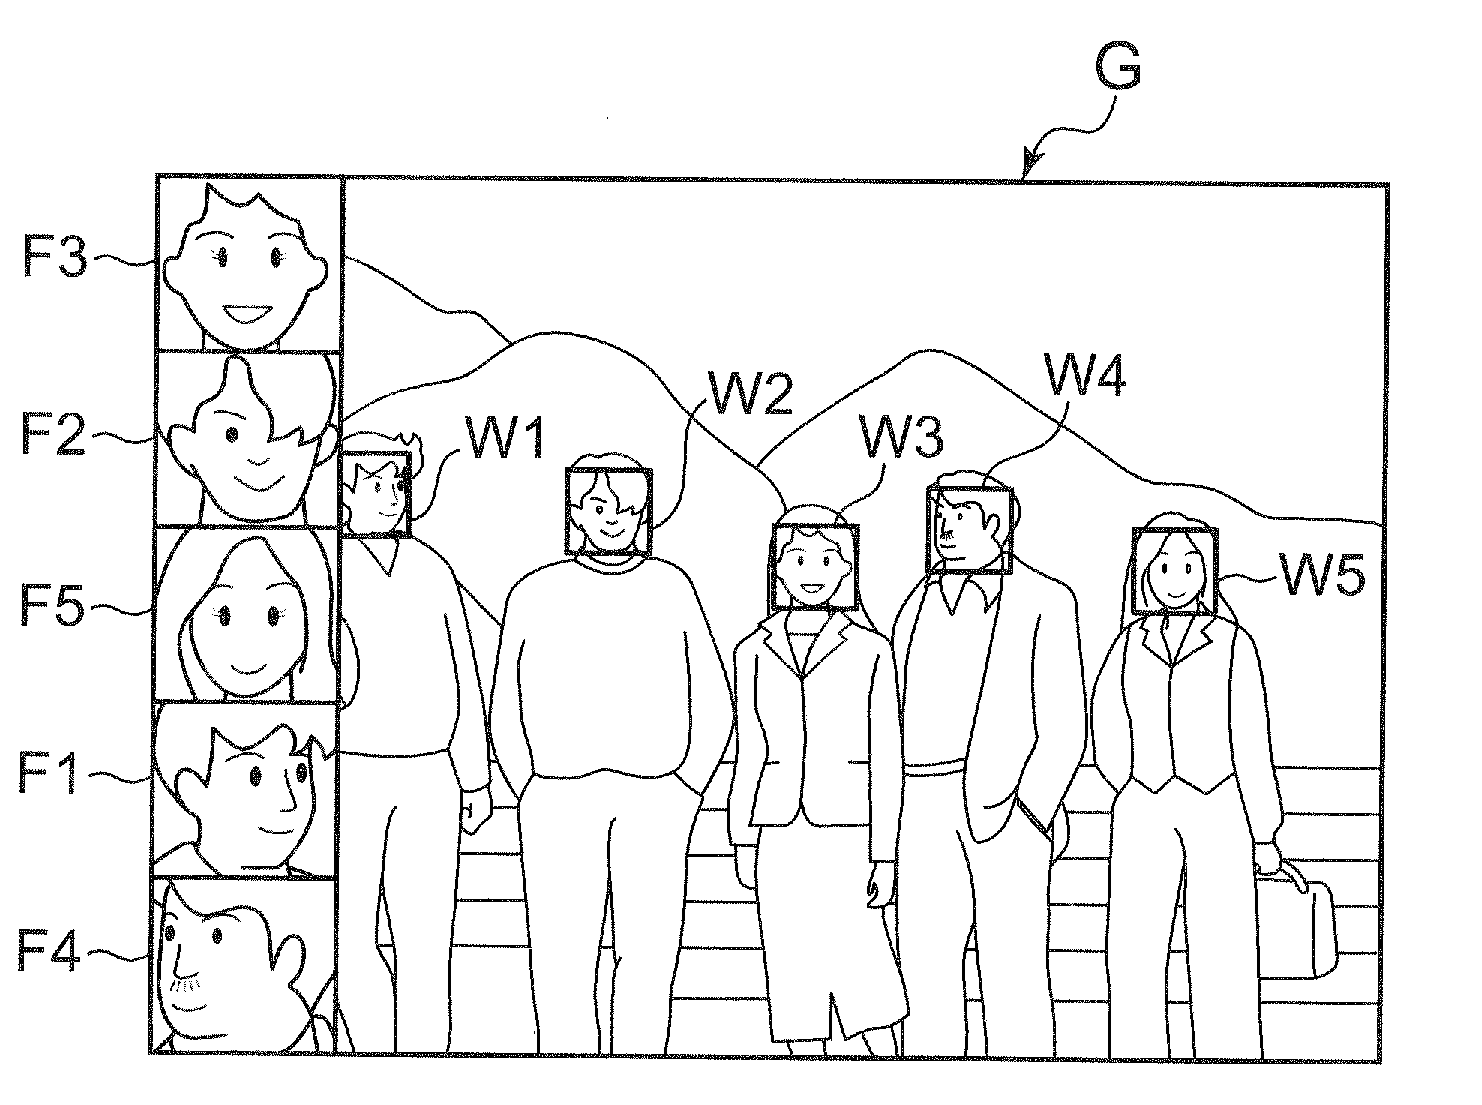 Image pickup apparatus equipped with face-recognition function